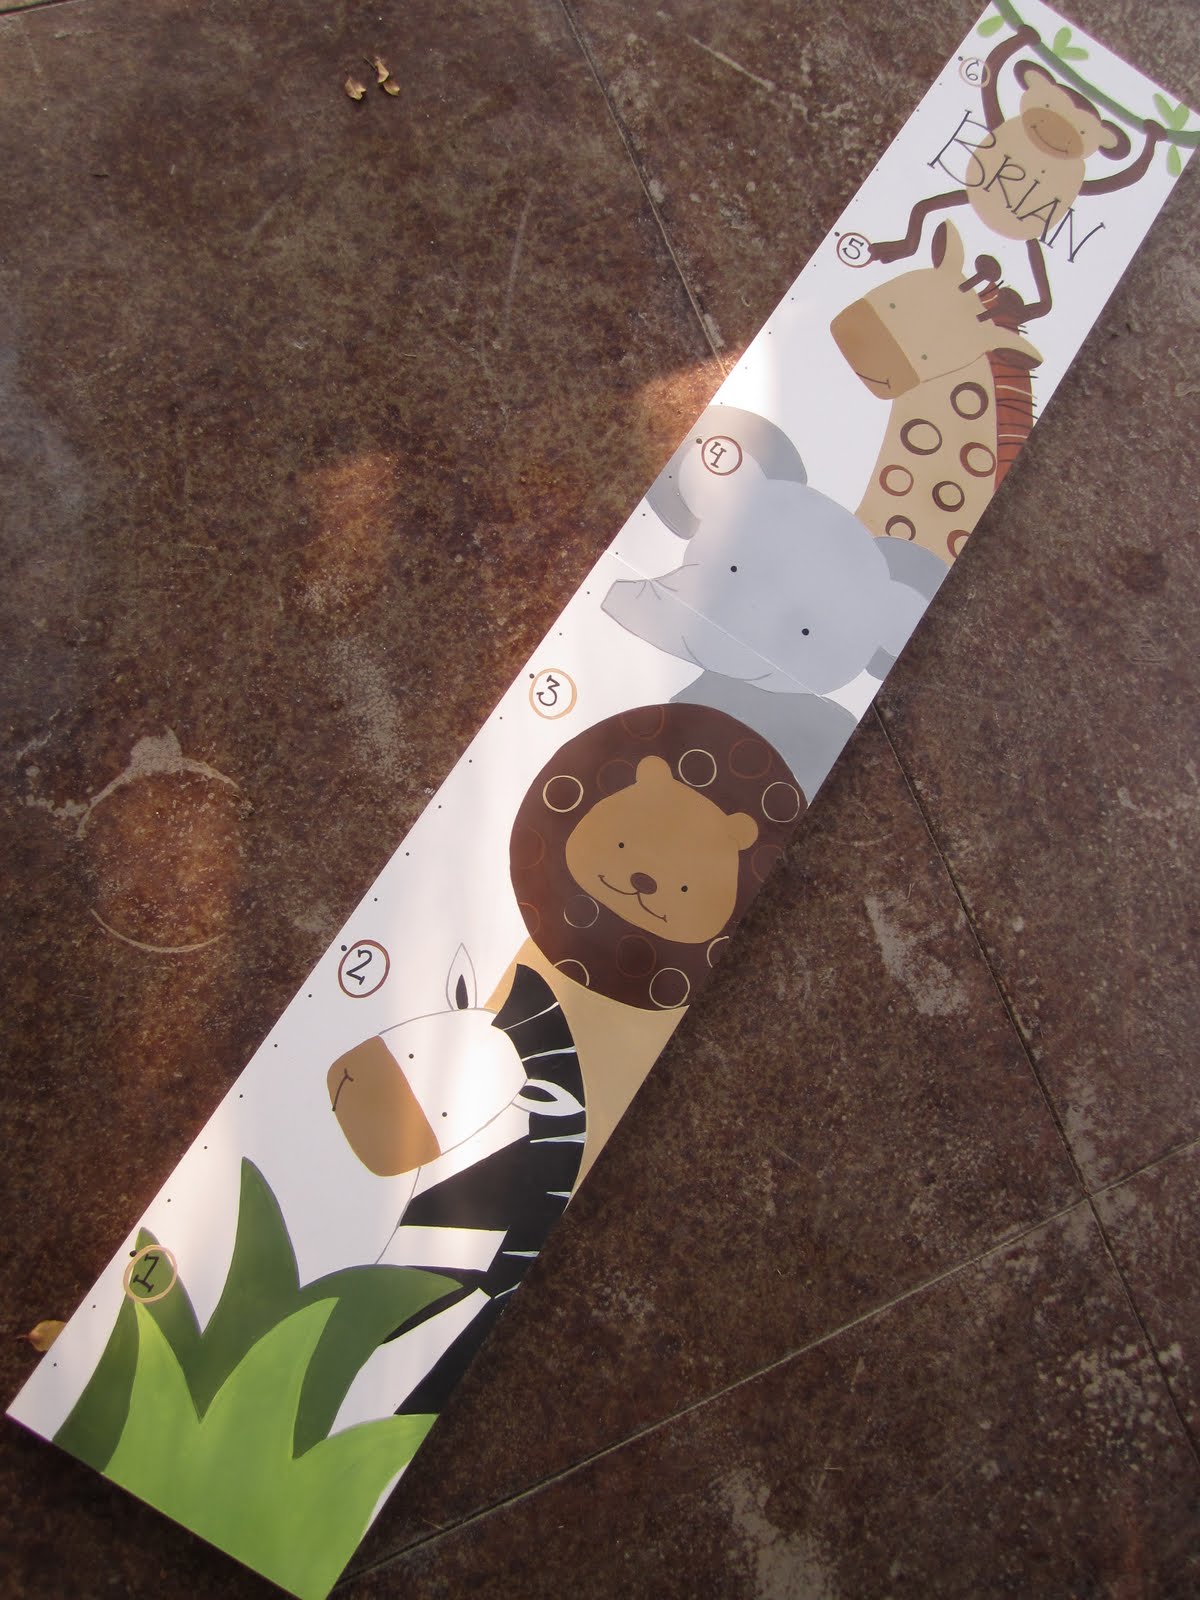 Jungle Themed Growth Chart